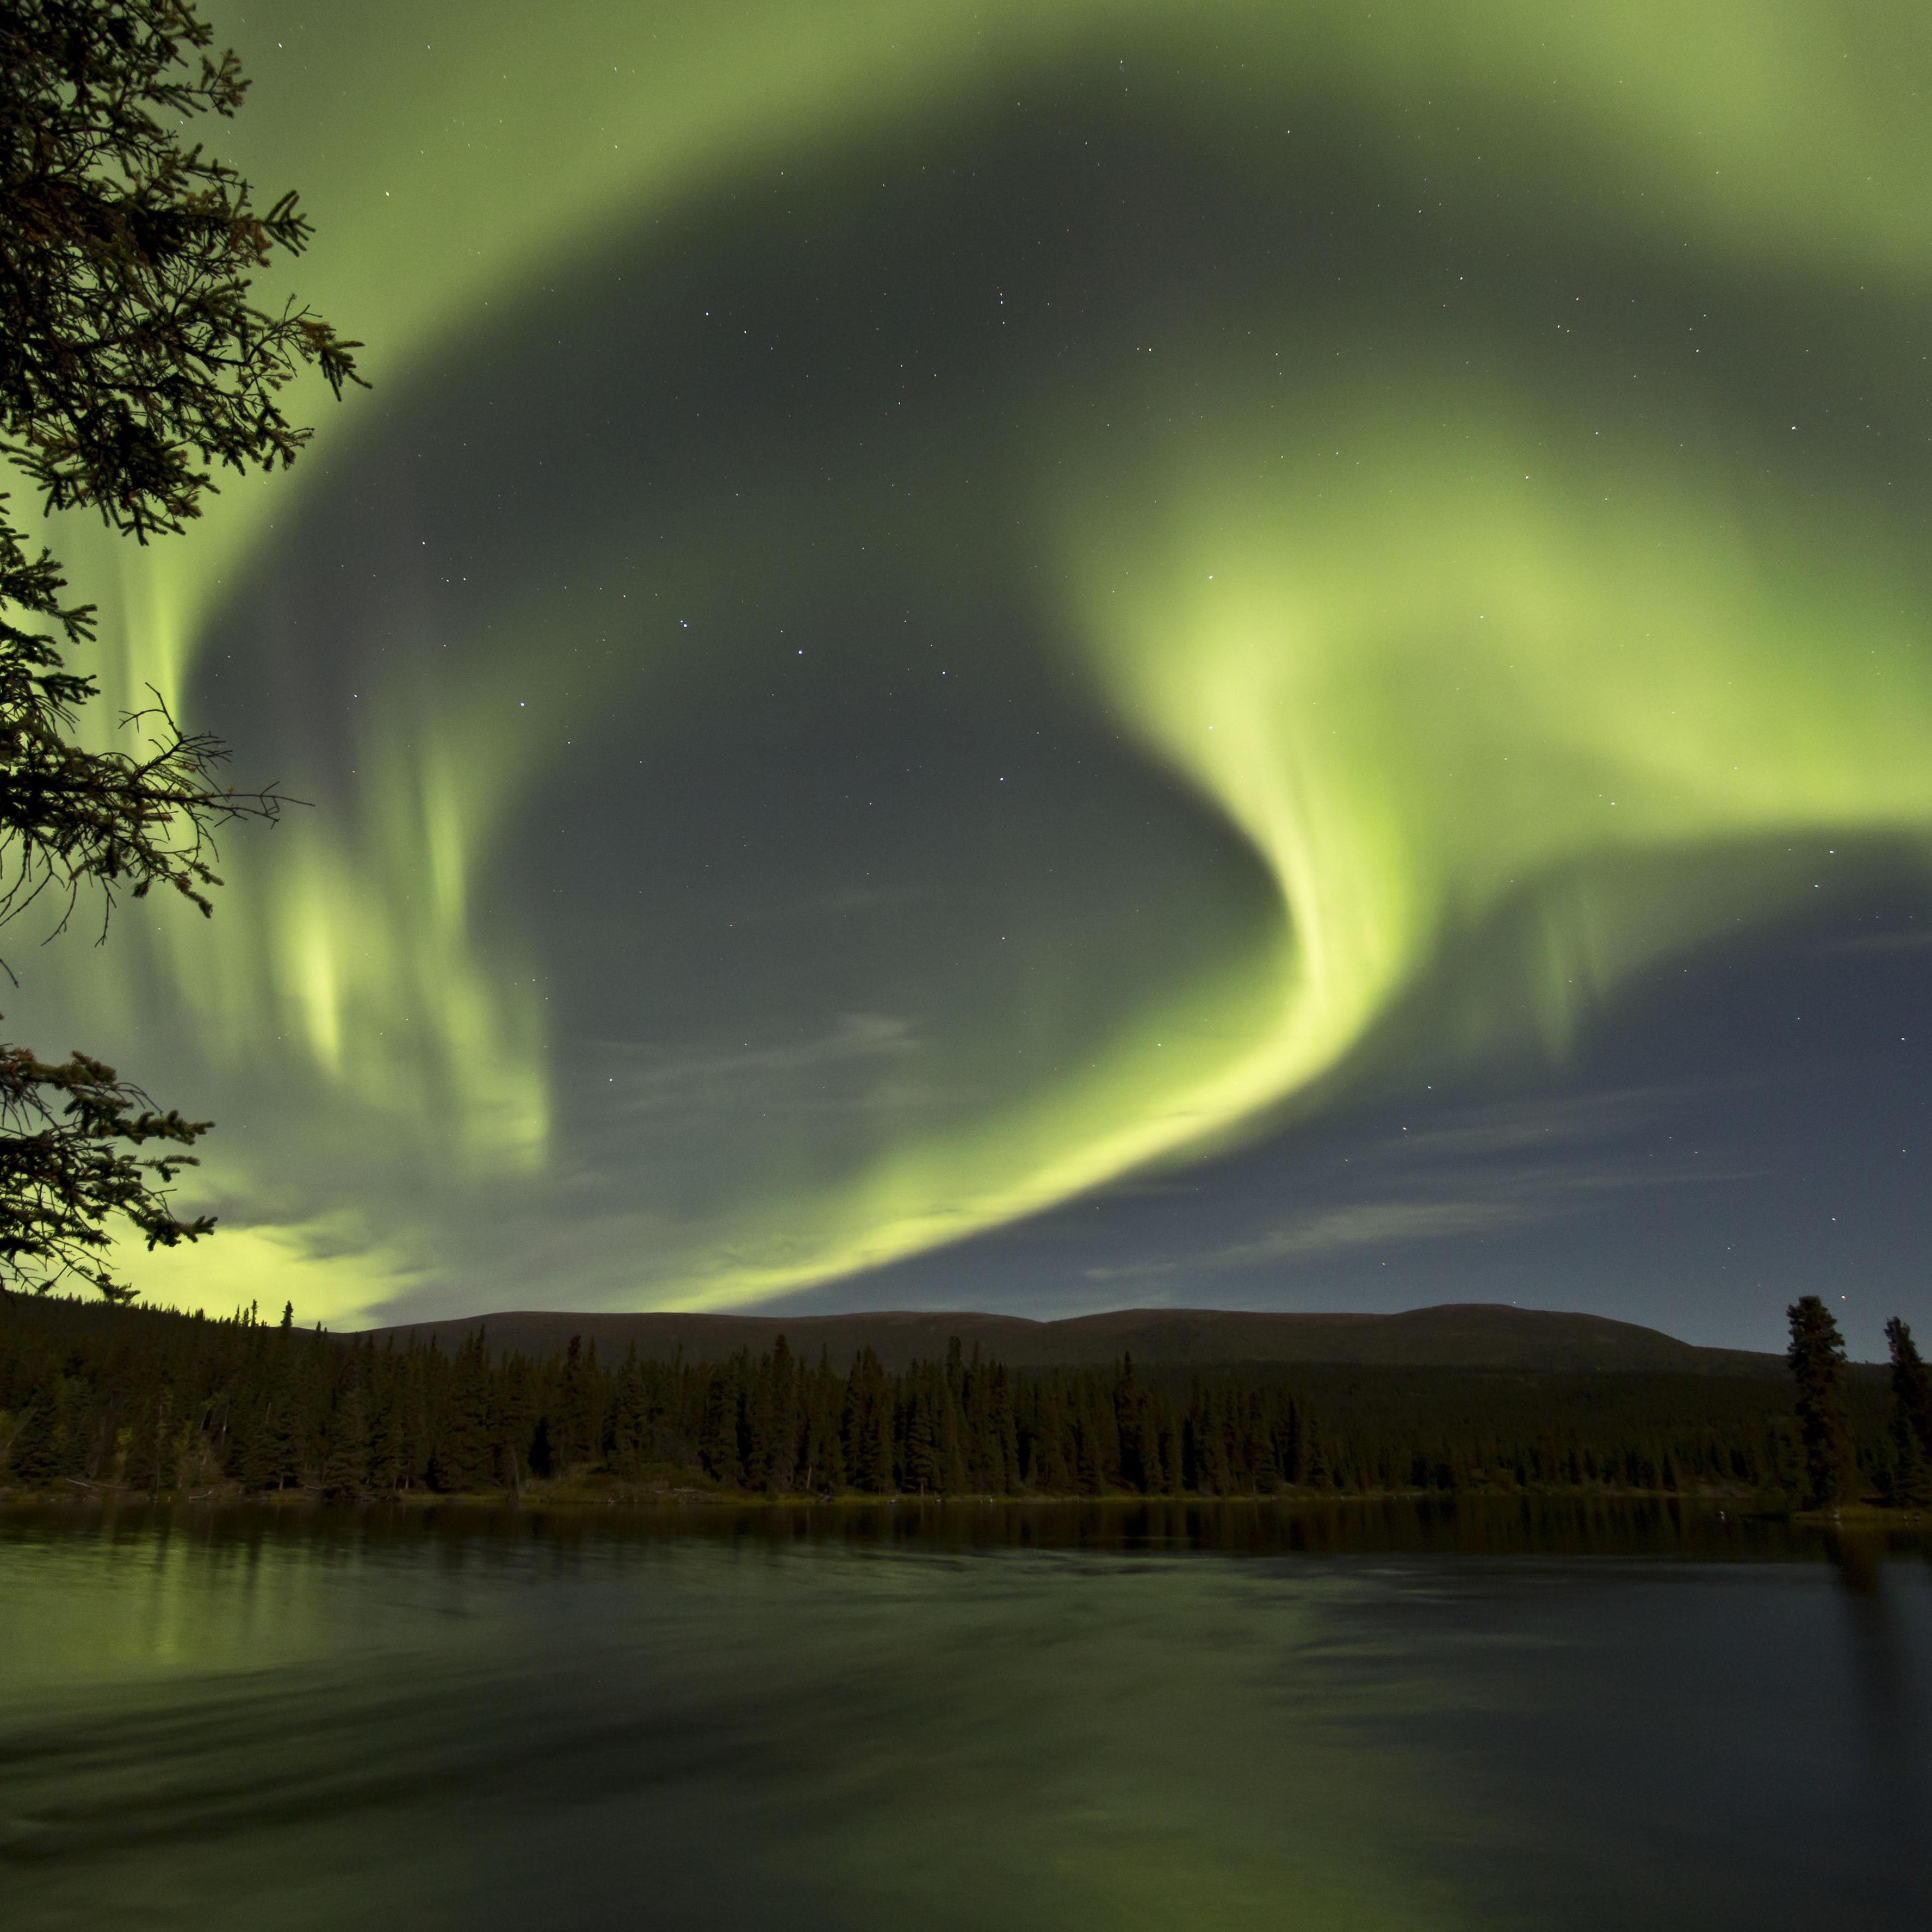 WHEN AND WHERE TO SEE THE AURORA BOREALIS IN THE YUKON